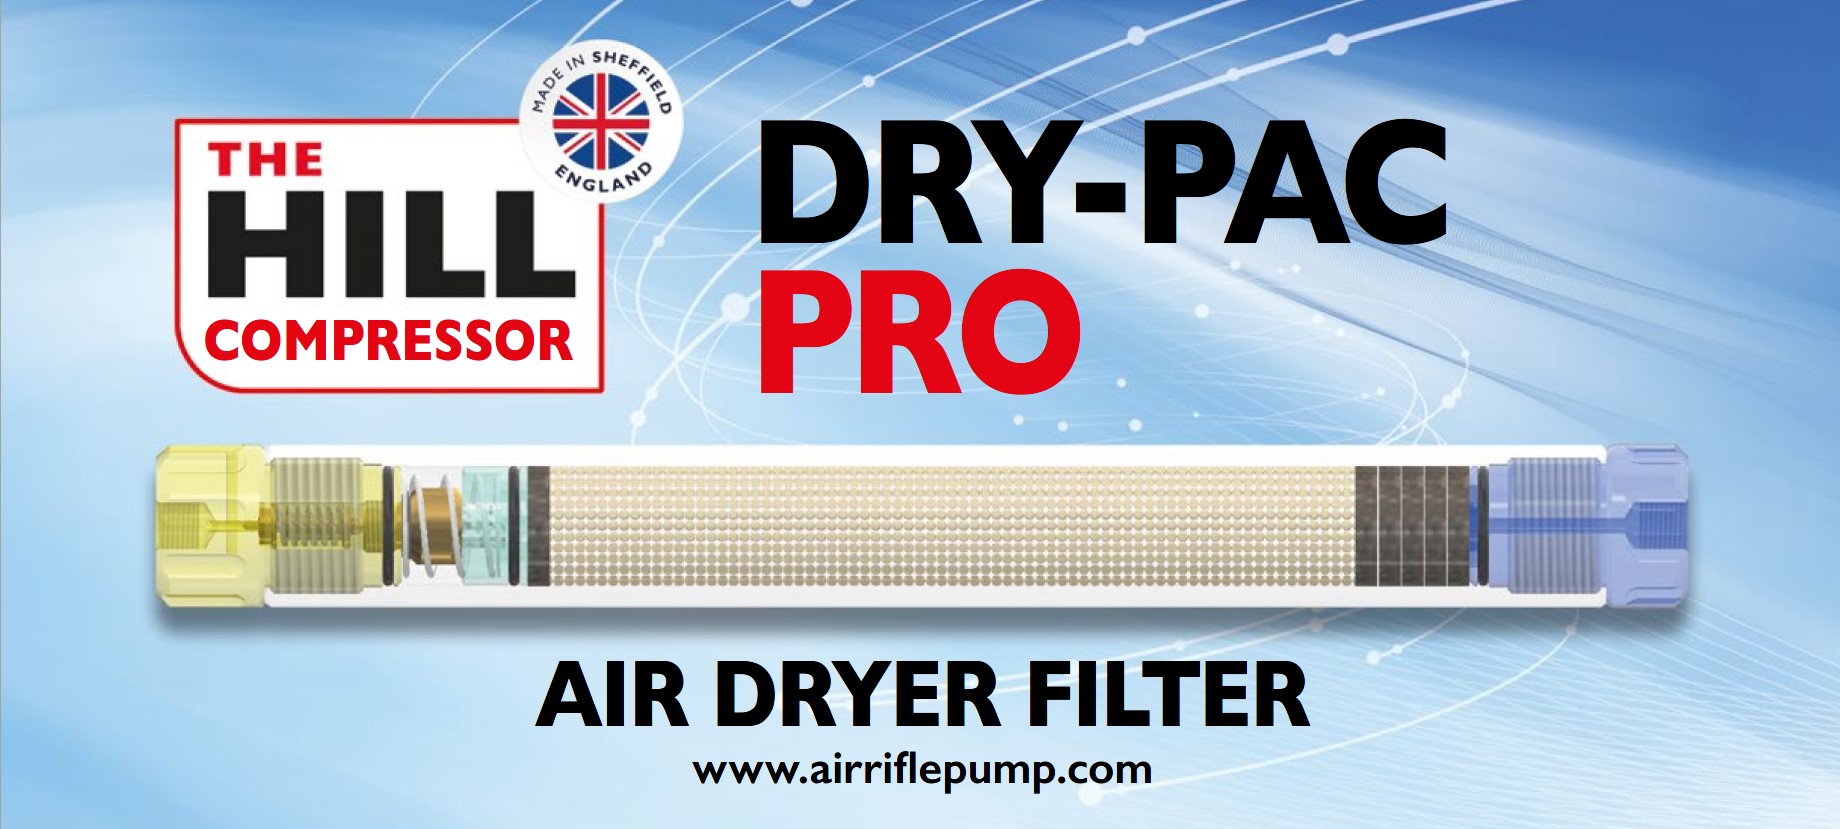 The Hill Compressor Dry-Pac Pro - Air Dryer Filter